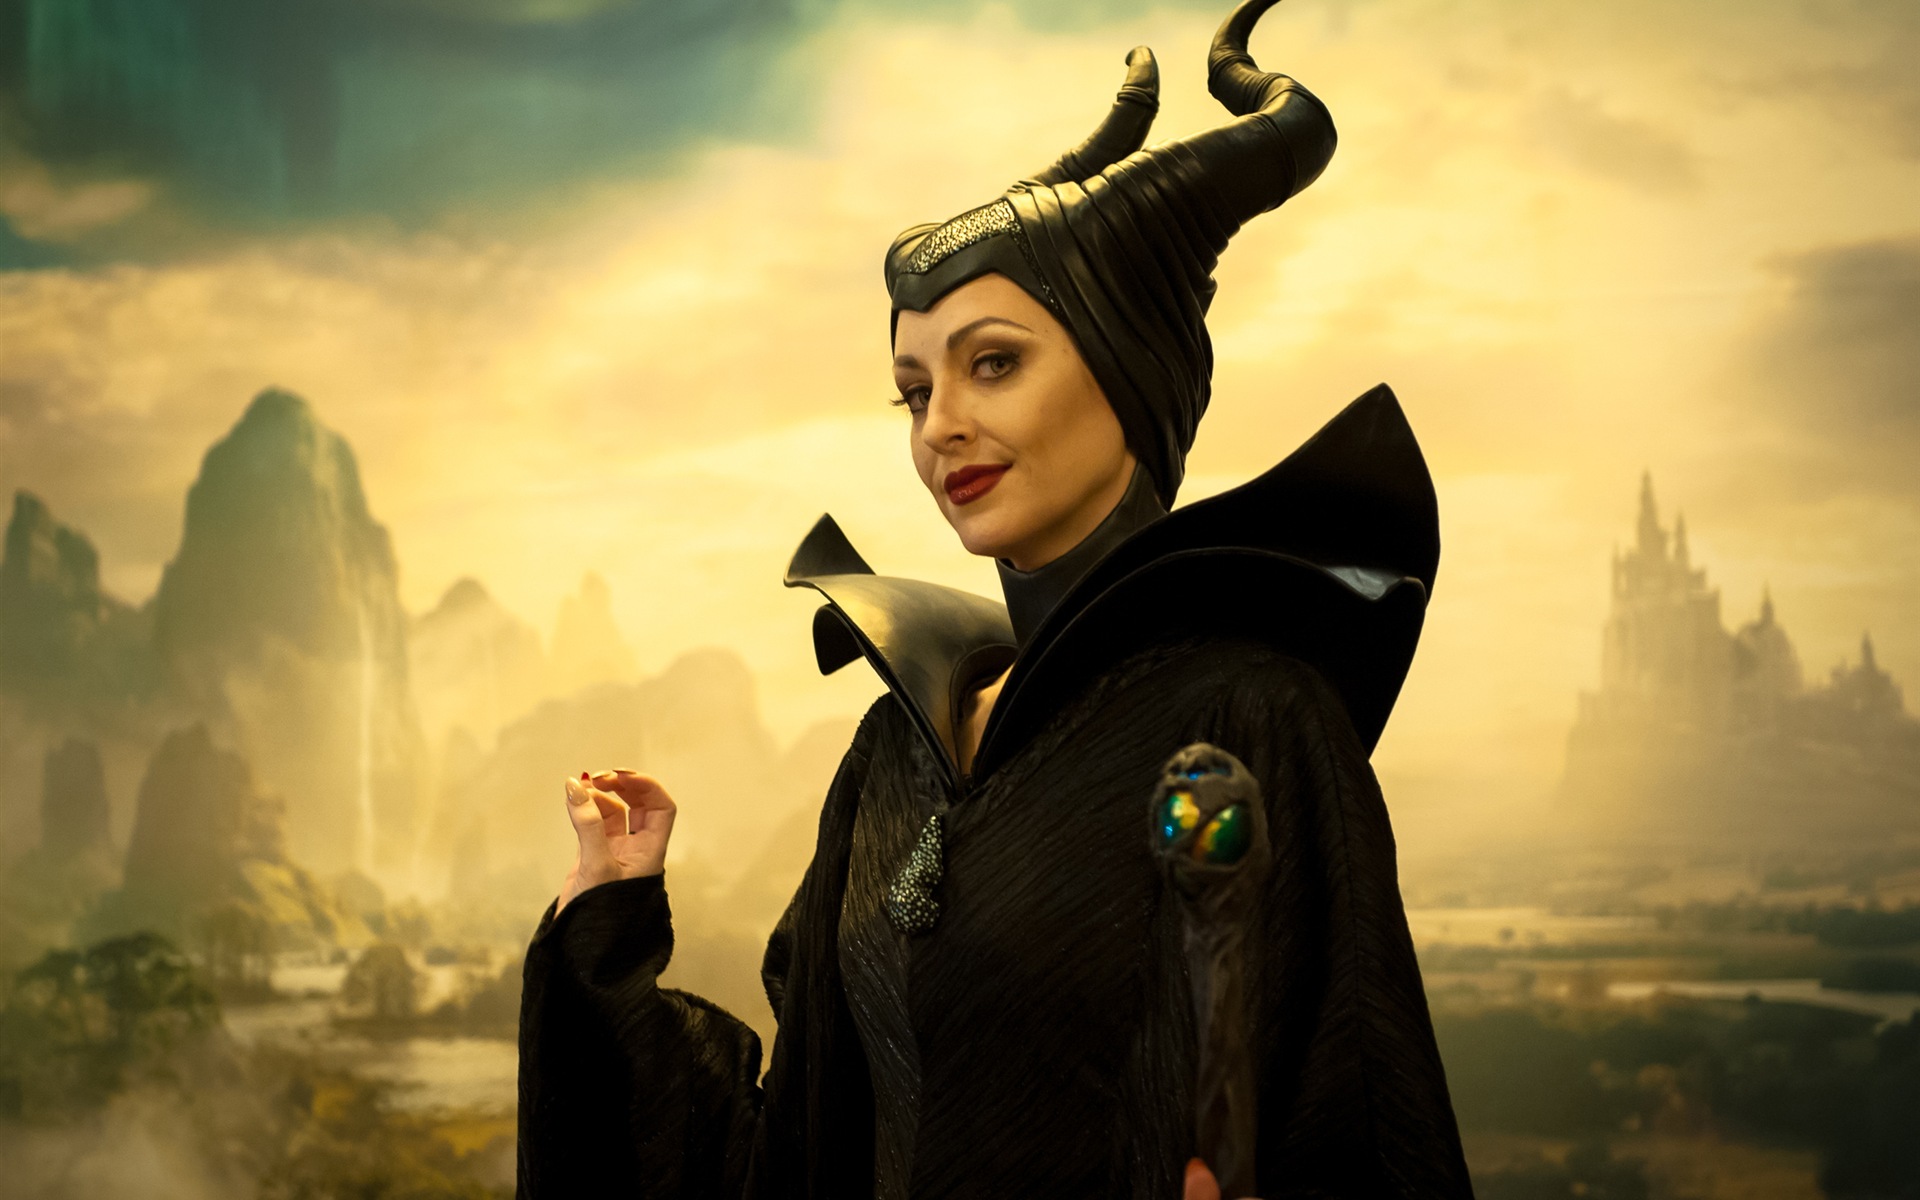 Maleficent 2014 HD movie wallpapers #11 - 1920x1200